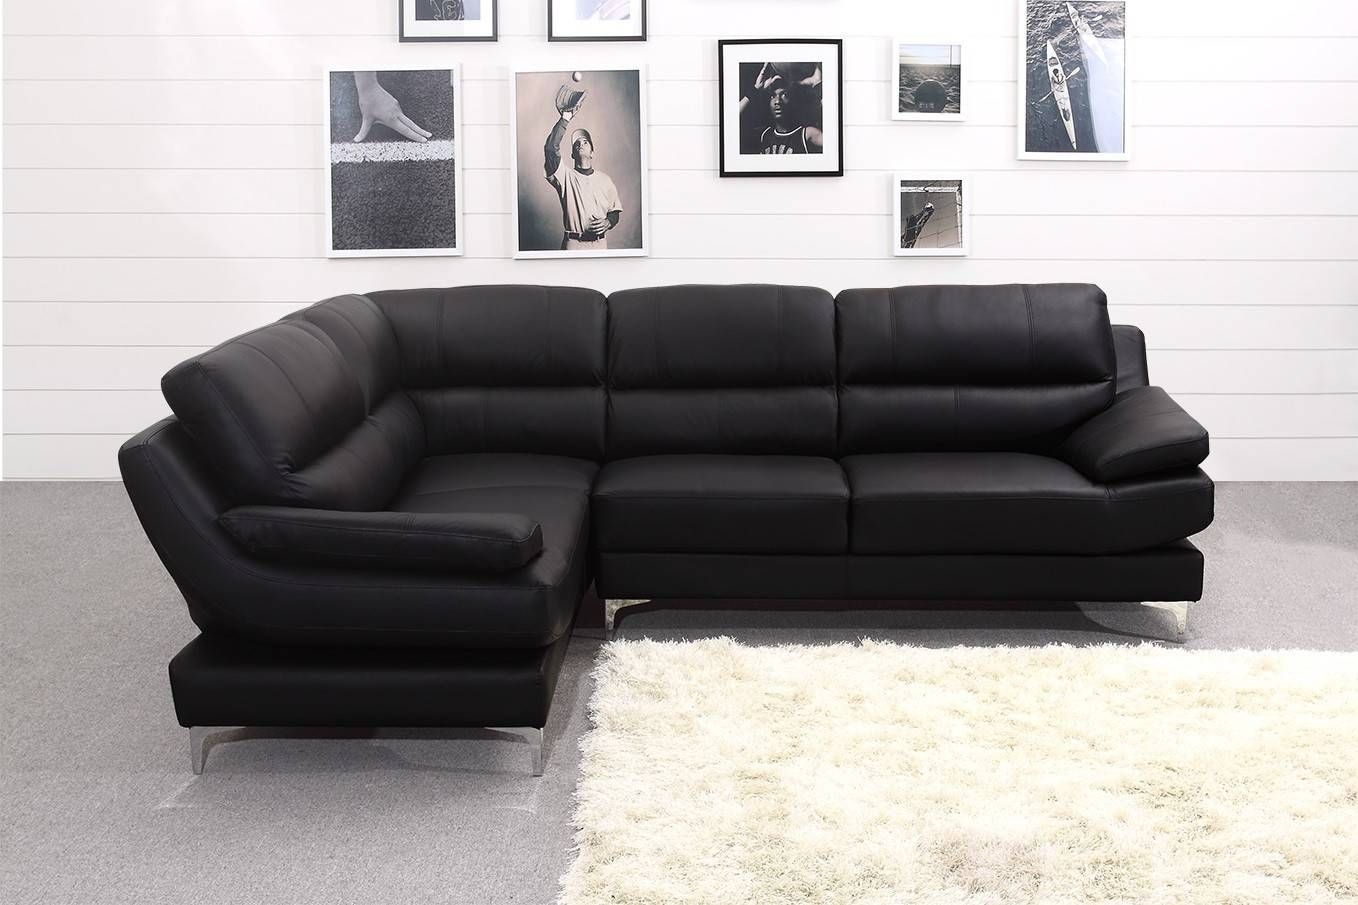 black leather cheap sofa beds